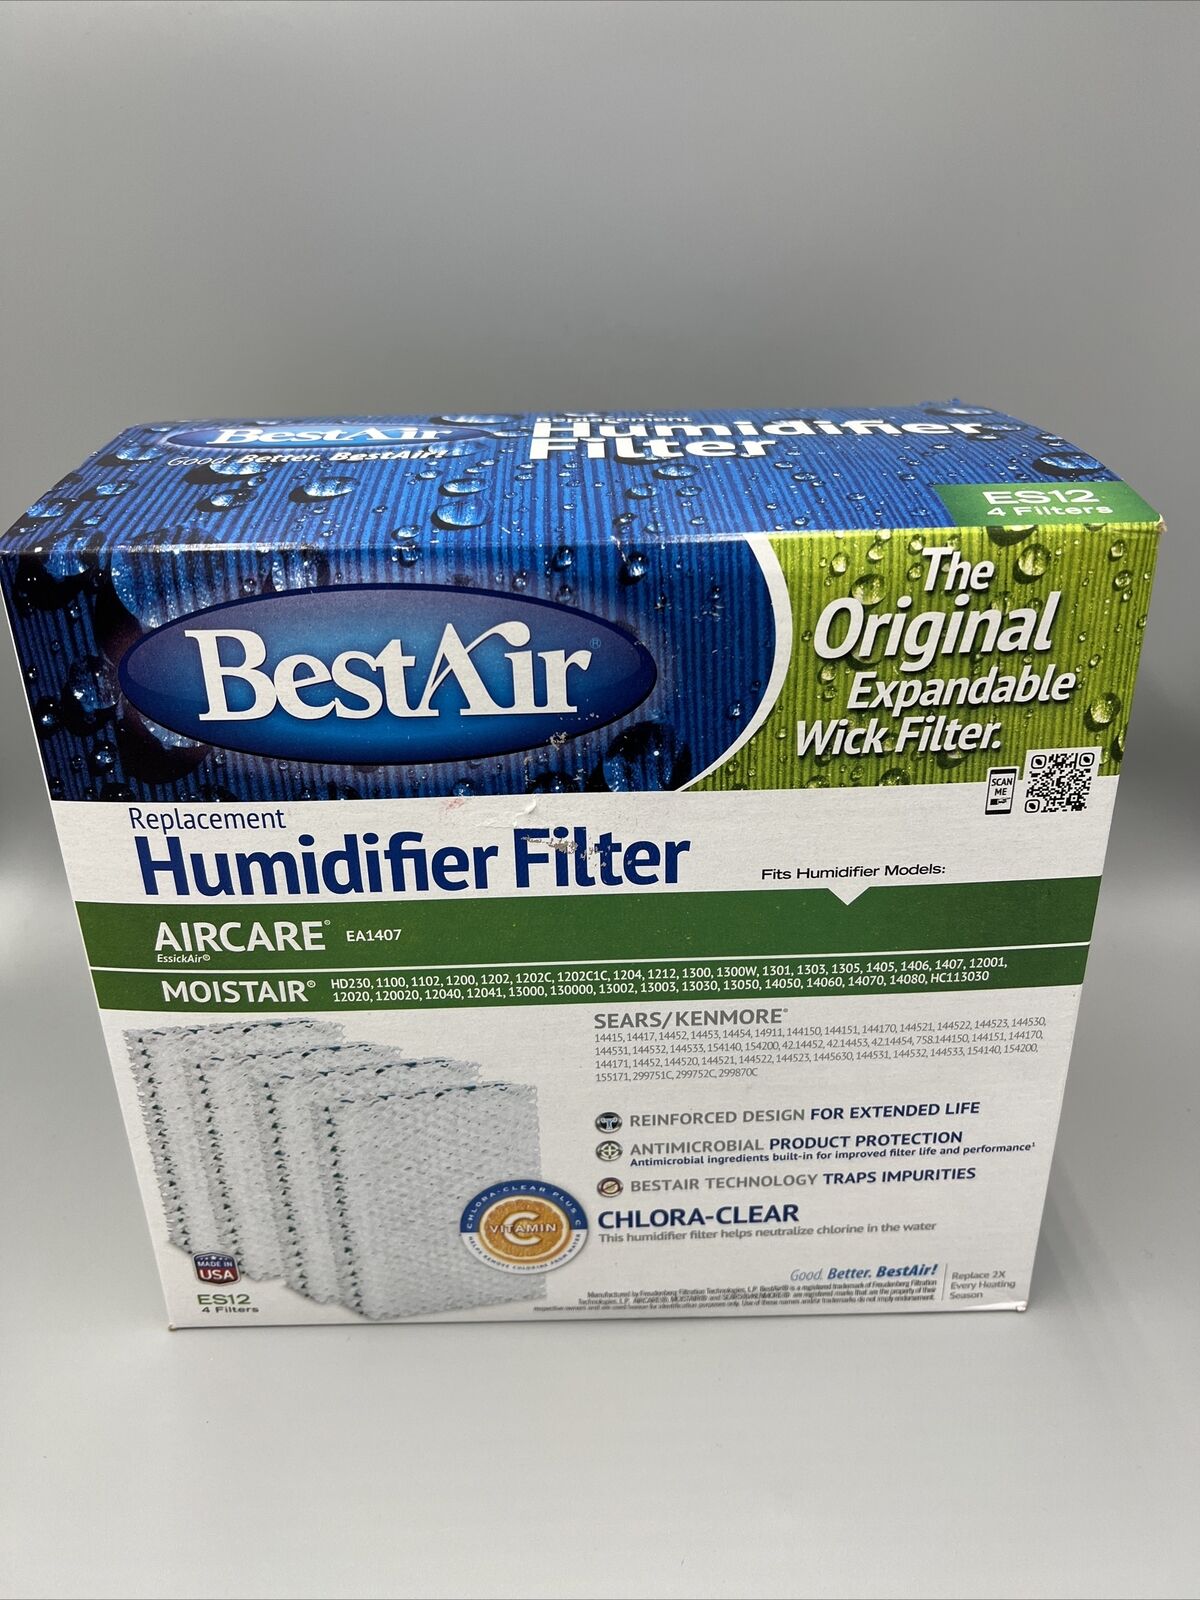 4 Pack BestAir ES12 Replacement Humidifier Filters, Aircare & MoistAir.